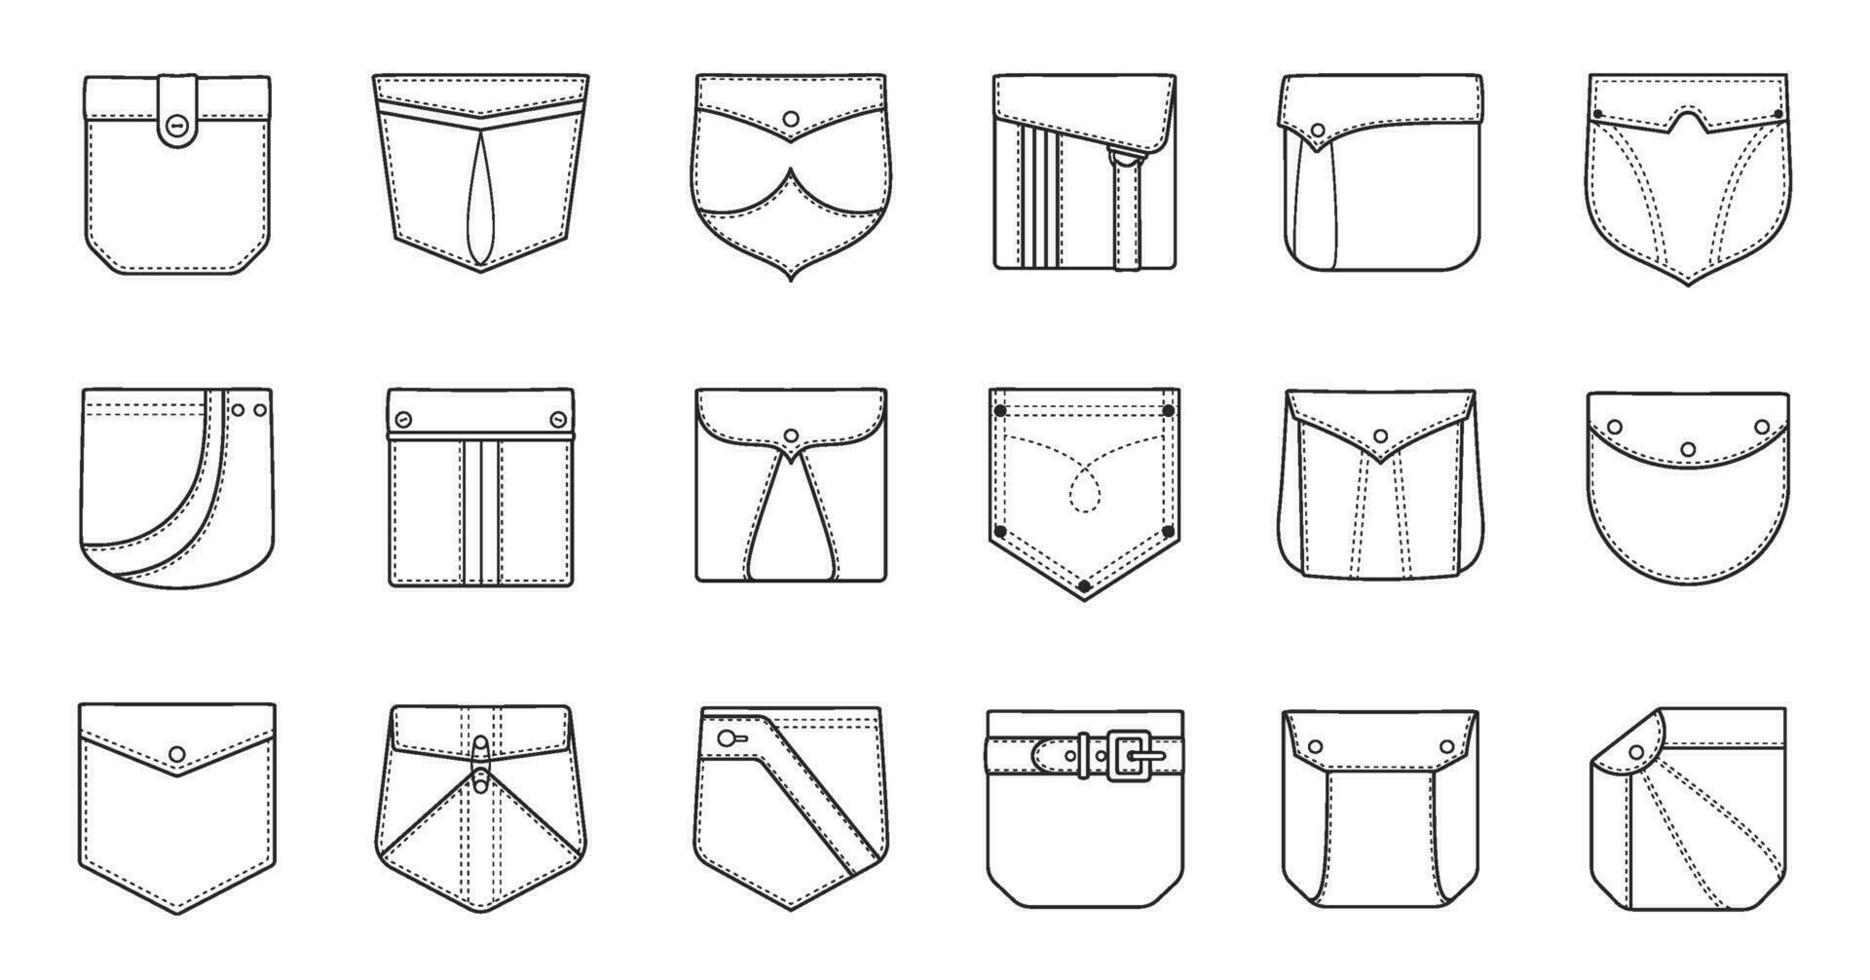 Outline patch pockets for shirts, cargo pants and denim jackets. Flap pocket sewing patterns in different shapes, fabric patches vector set